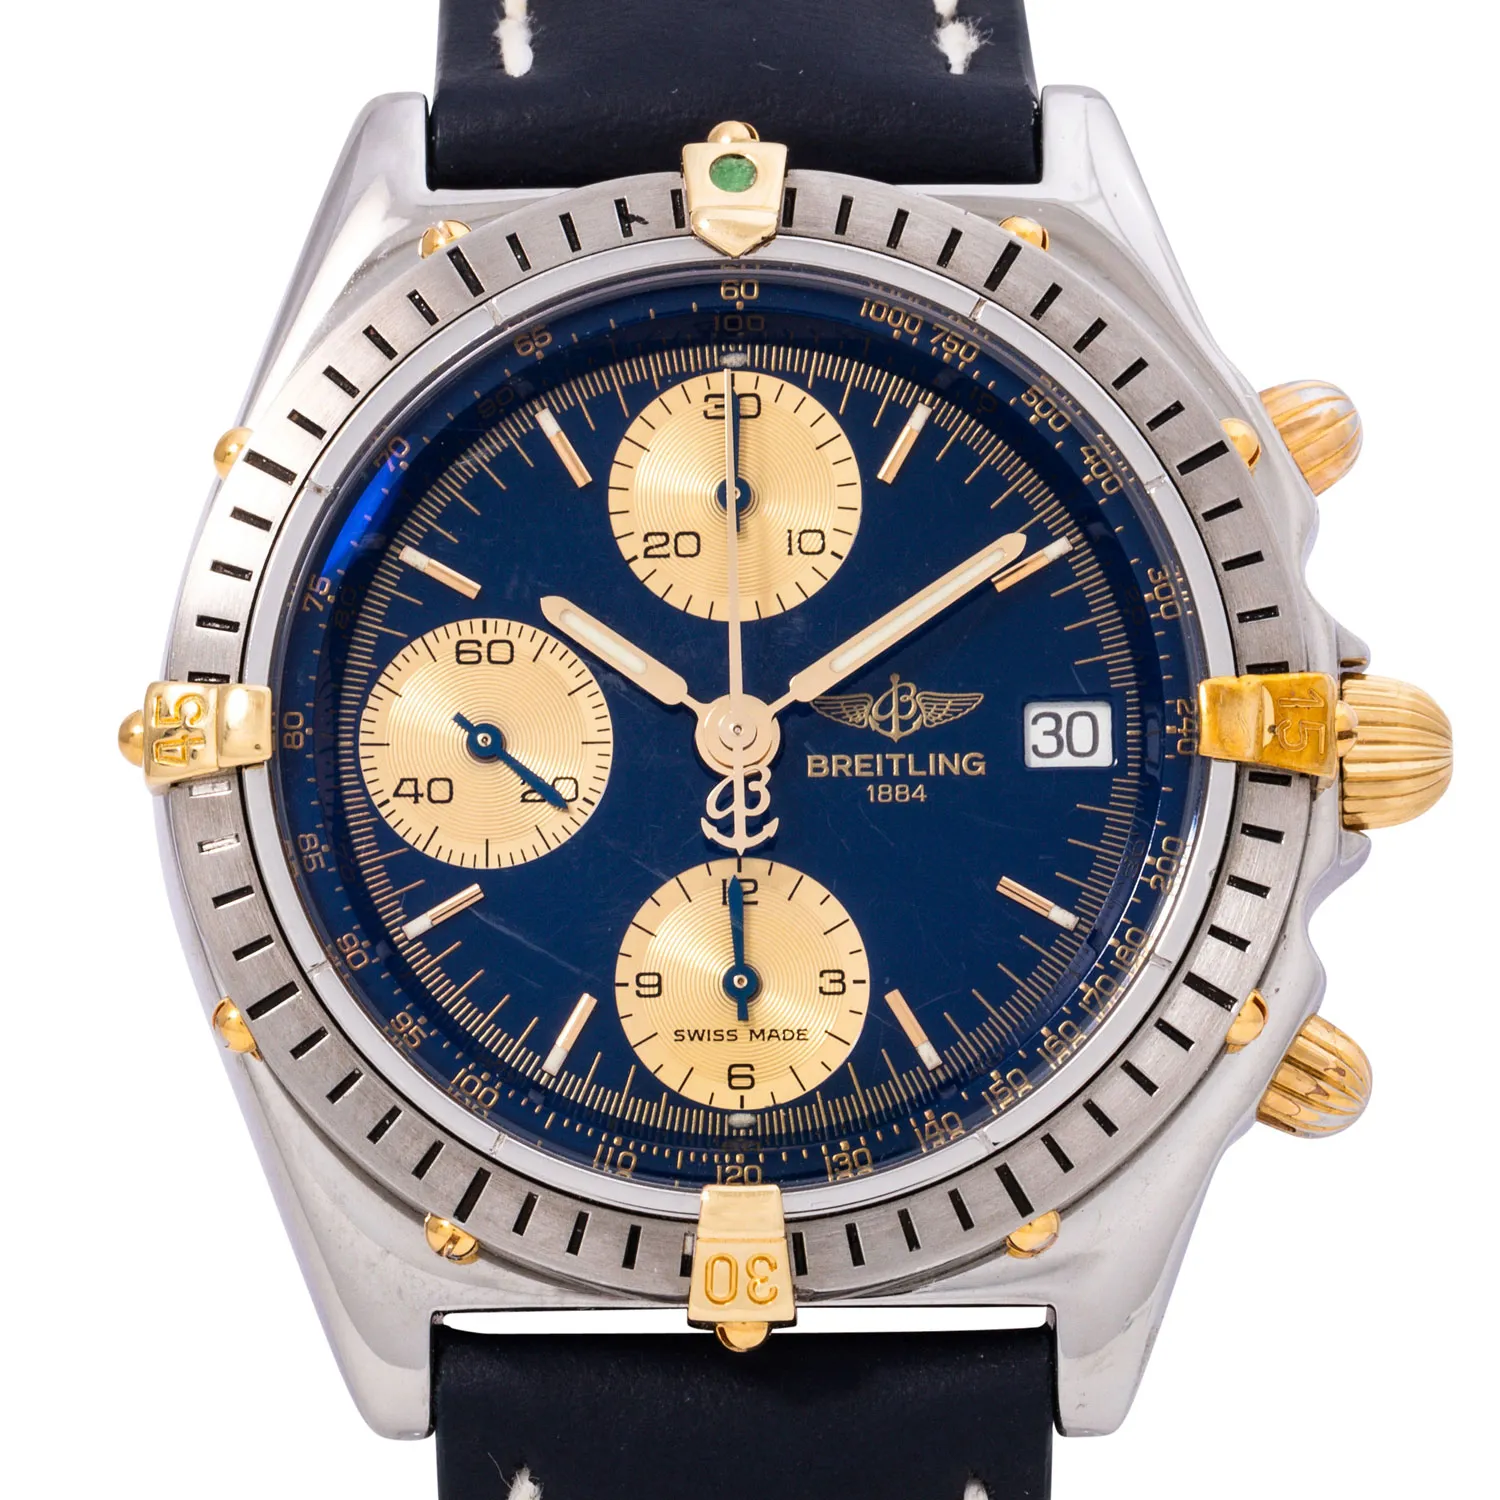 Breitling Chronomat B13048 40mm Yellow gold and stainless steel Blue